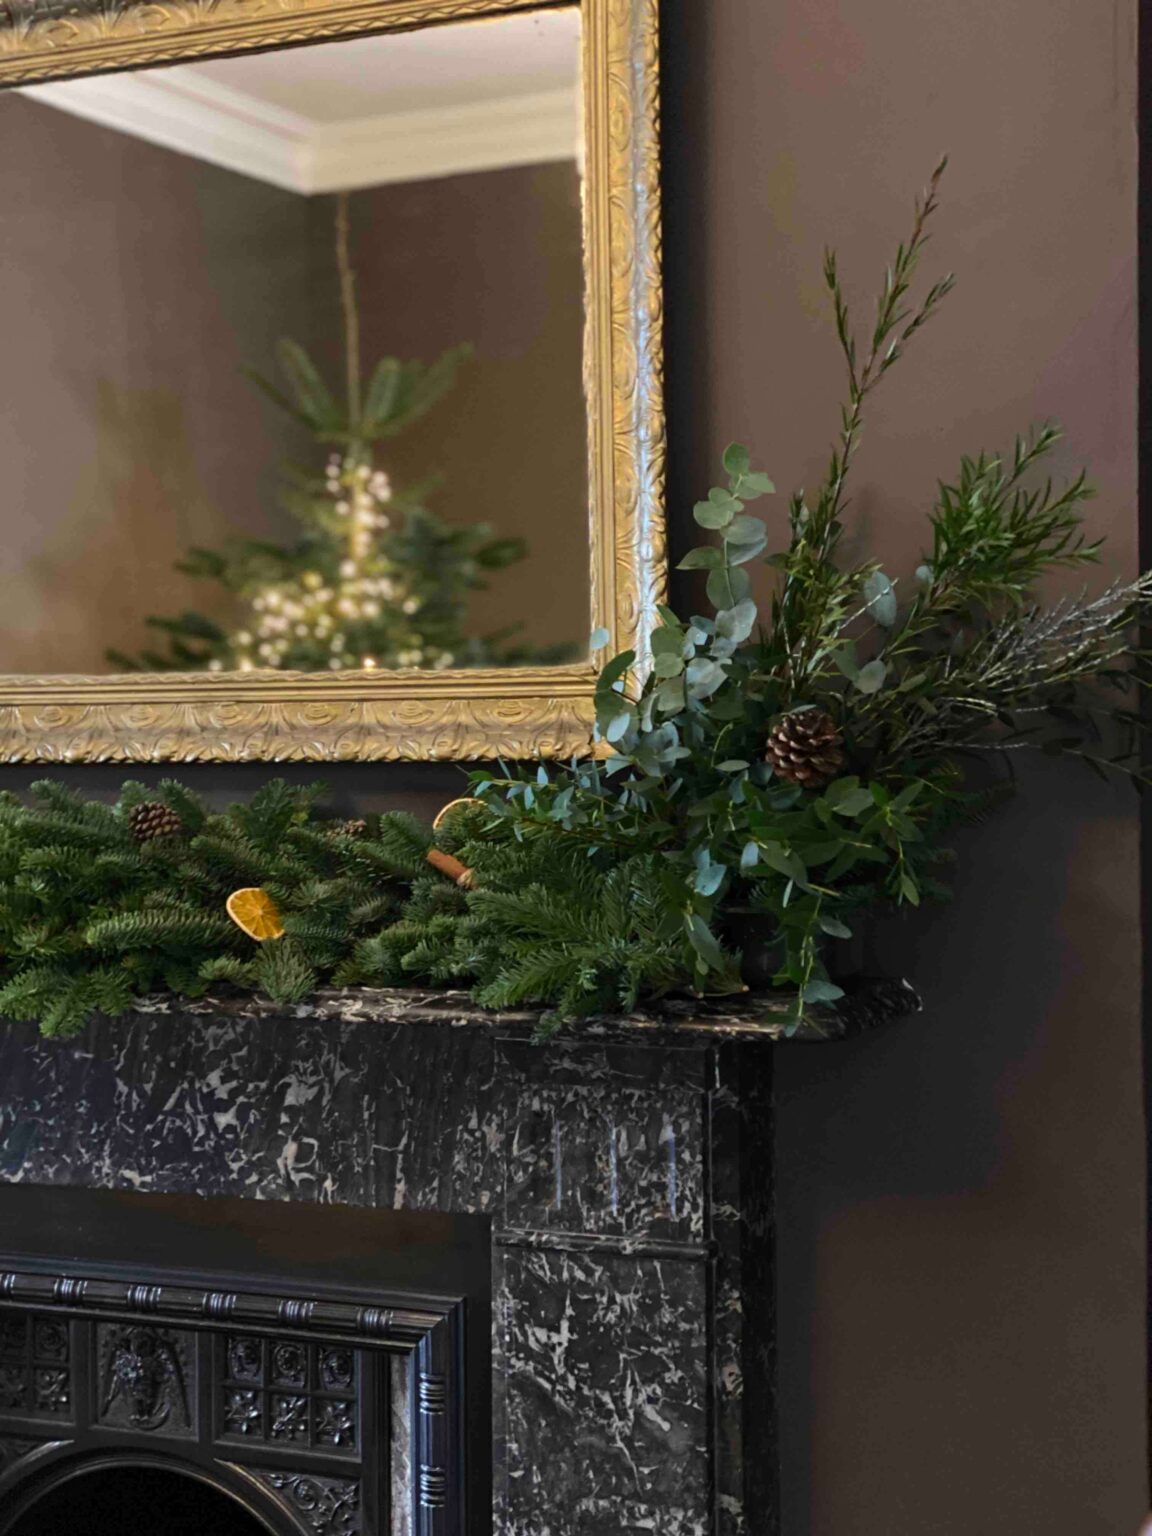 Pines and Co Garland: Beautiful holiday garland made with pine branches, ornaments, and eucalyptus